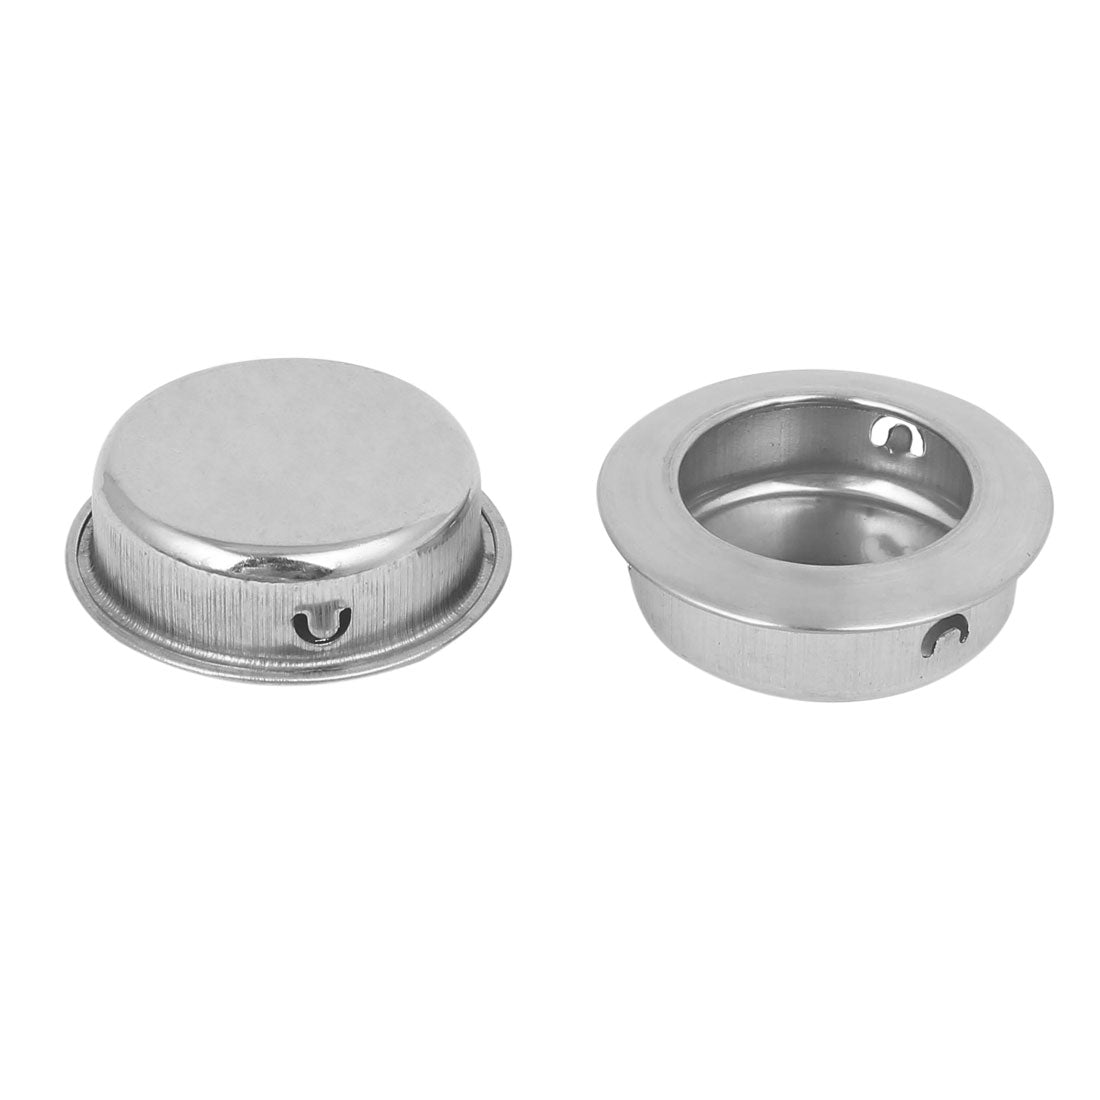 uxcell Uxcell Drawer 304 Stainless Steel Recessed Round Flush Pull Handle 35mm Diameter 13mm Height 20pcs